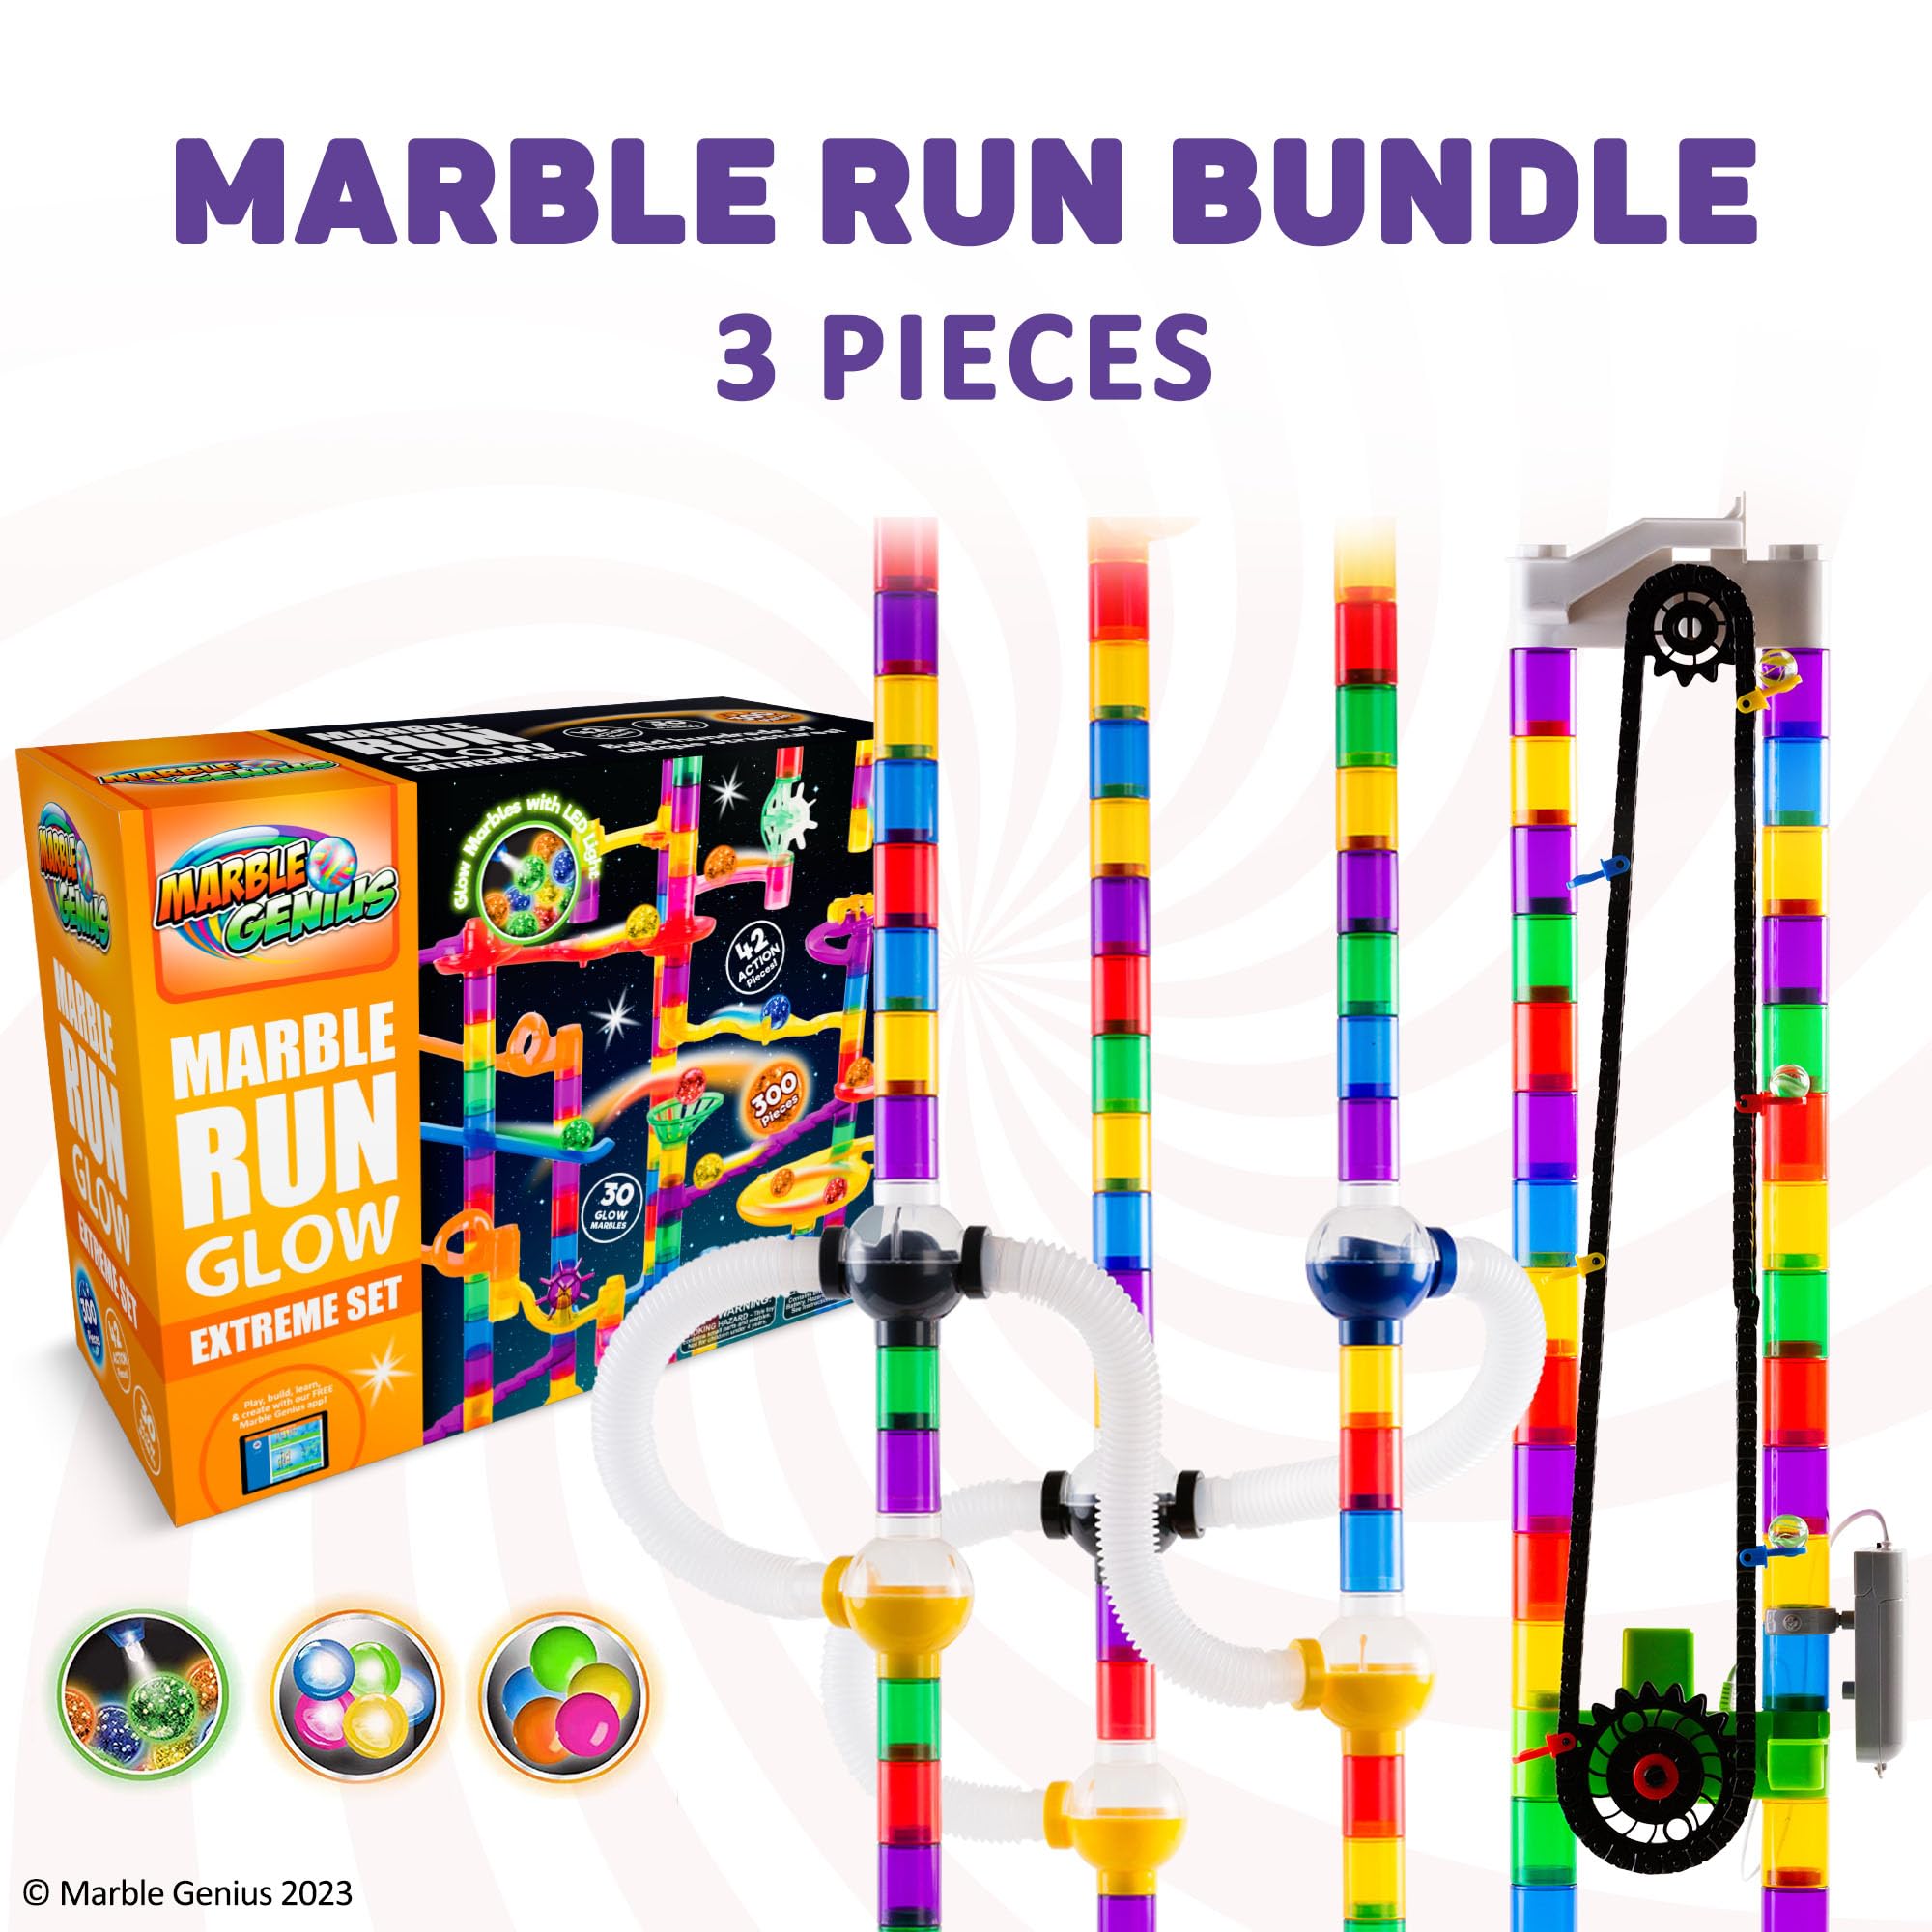 Marble Genius Bundle: Glow Extreme Set (300 Pieces), Automatic Chain Lift, Marble Run Pipes & Spheres Accessory Add-on Set, Perfect for Kids and Adults Alike